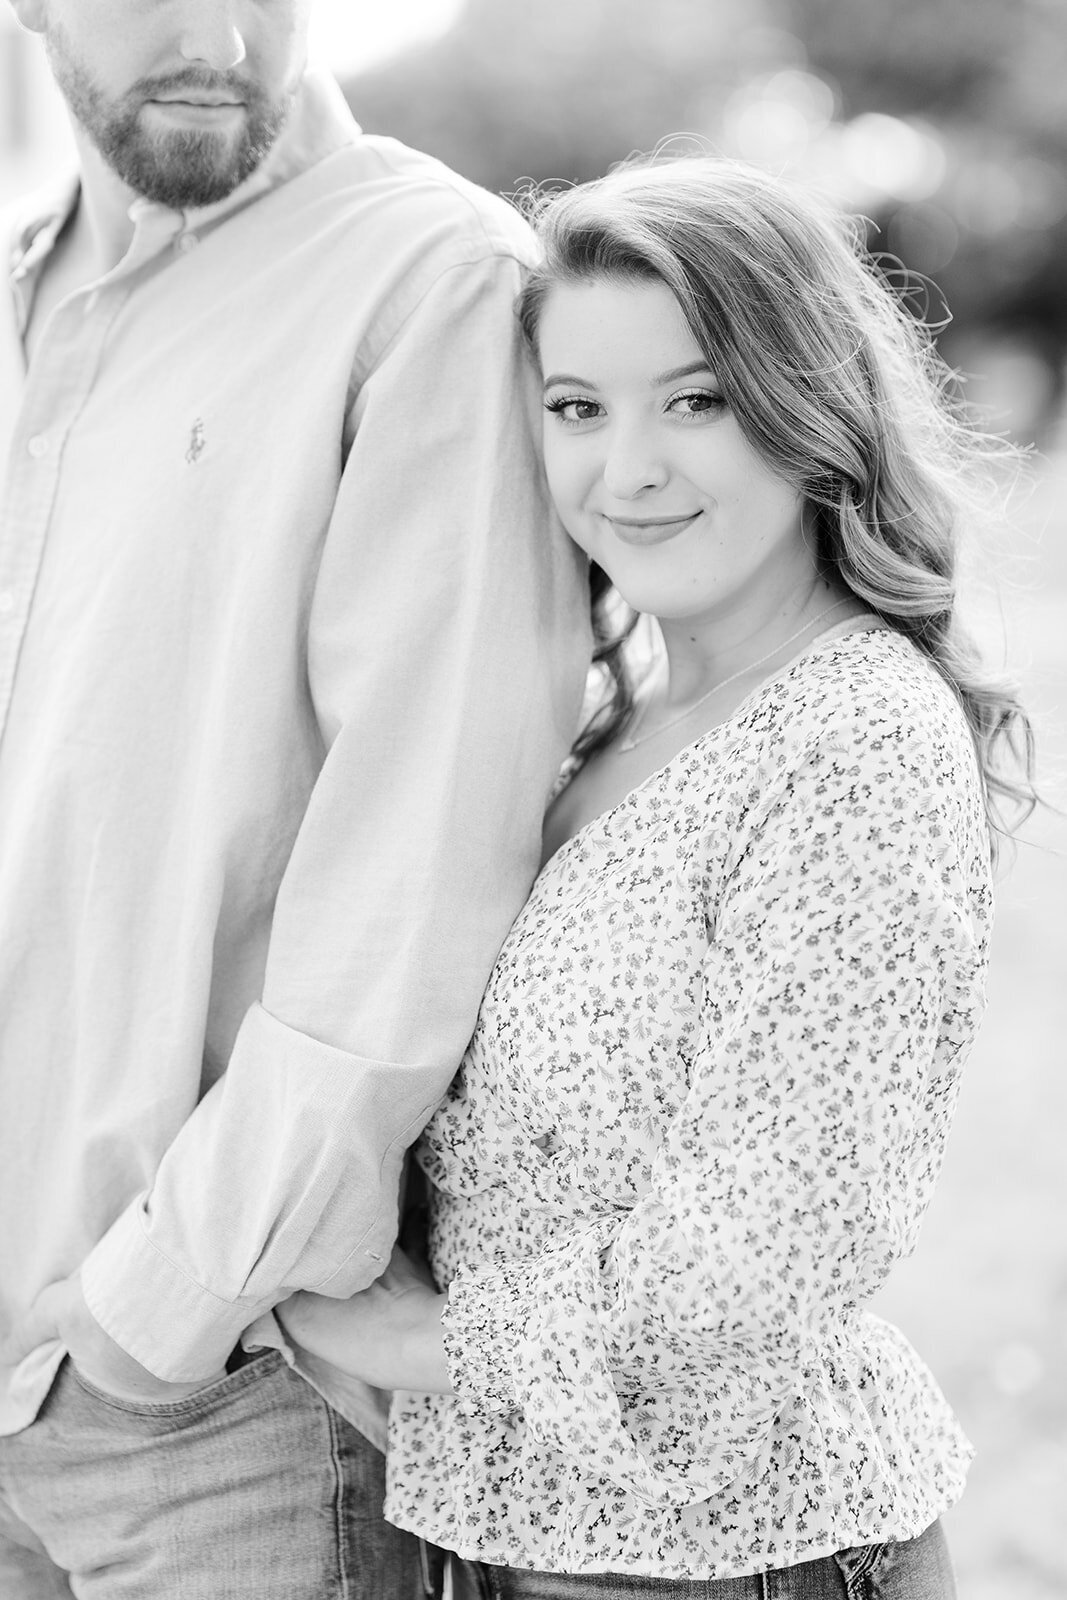 Engagement photo of couple embracing in black and white